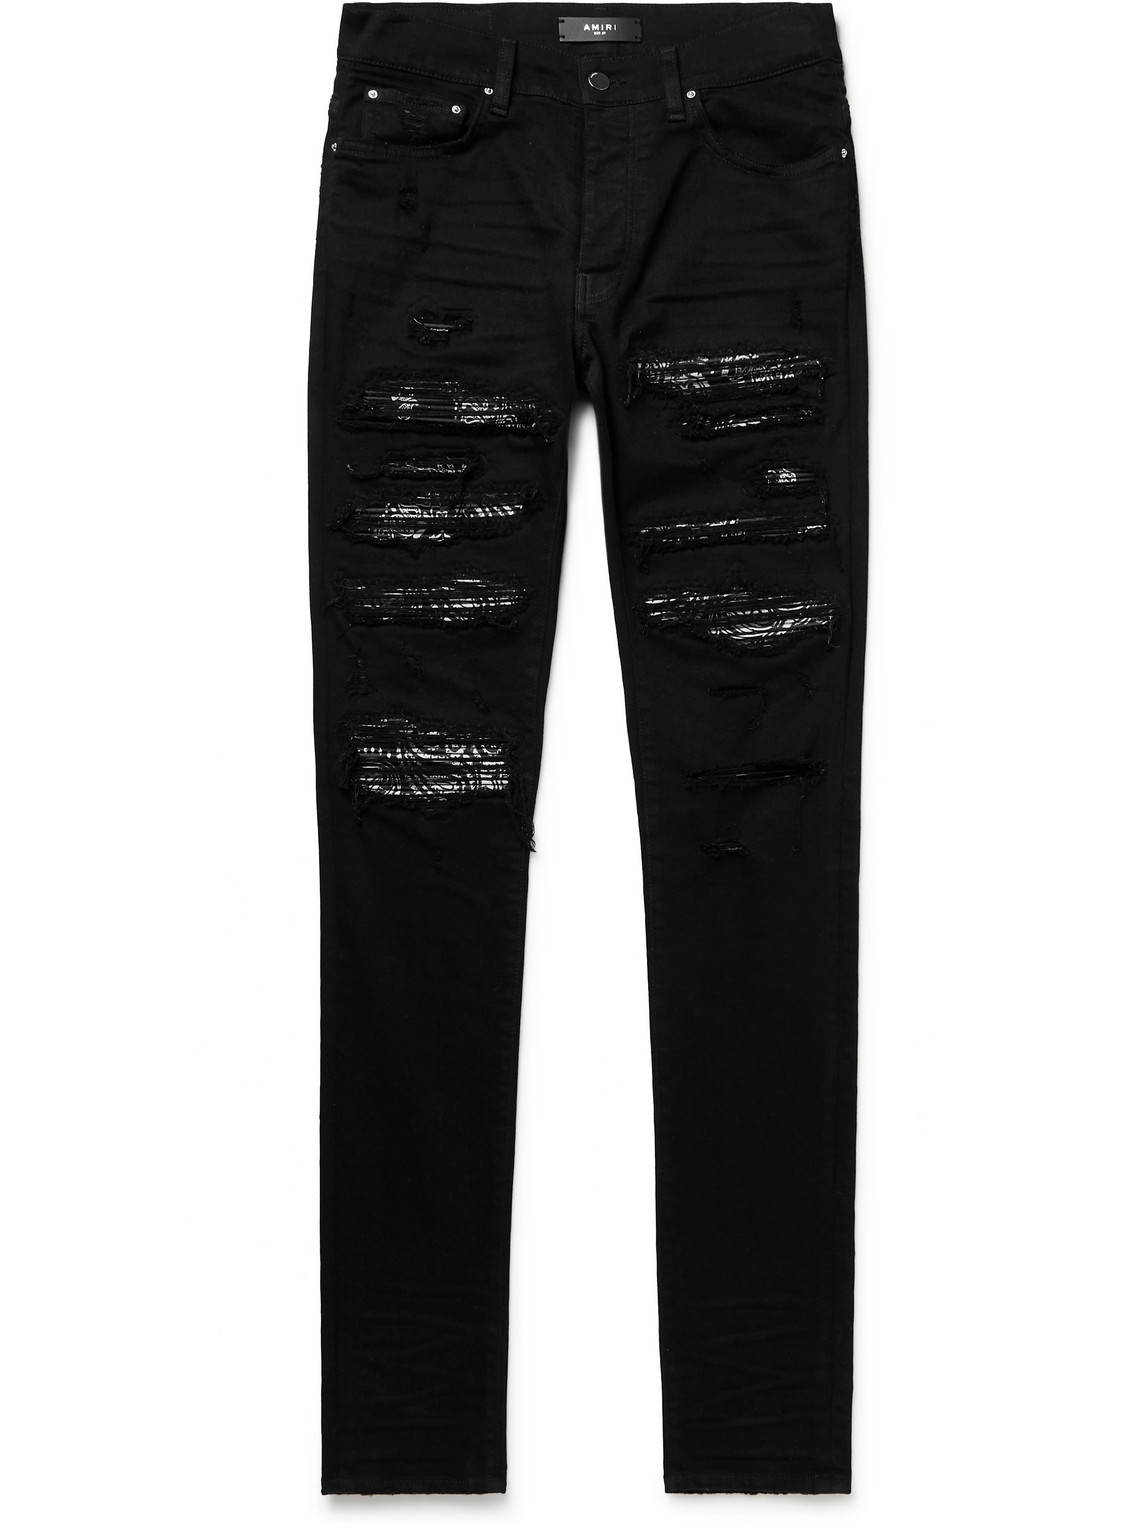 Thrasher Skinny-Fit Distressed Panelled Jeans